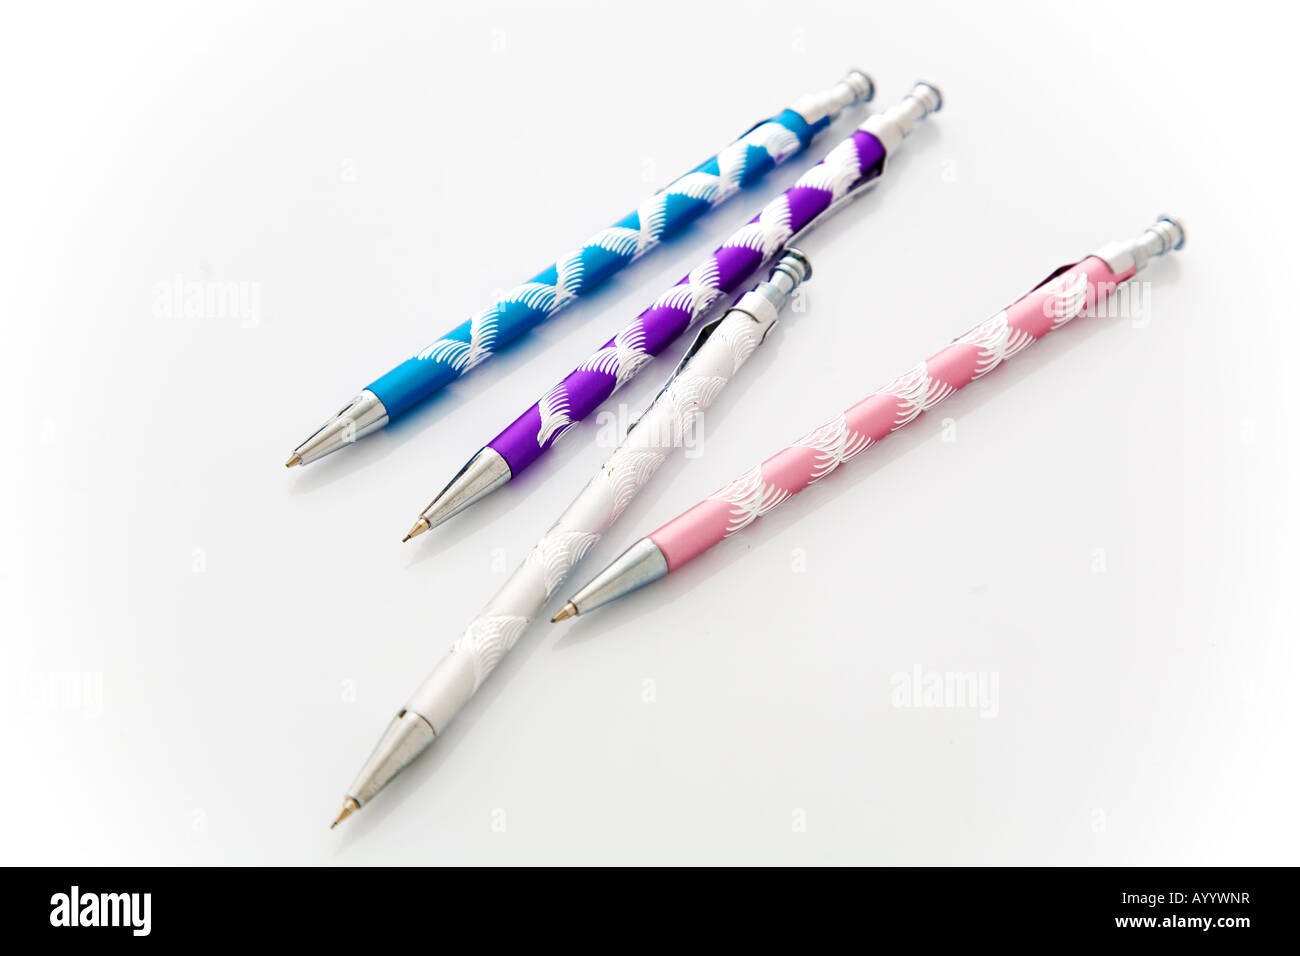 Update more than 143 decorative writing pens latest